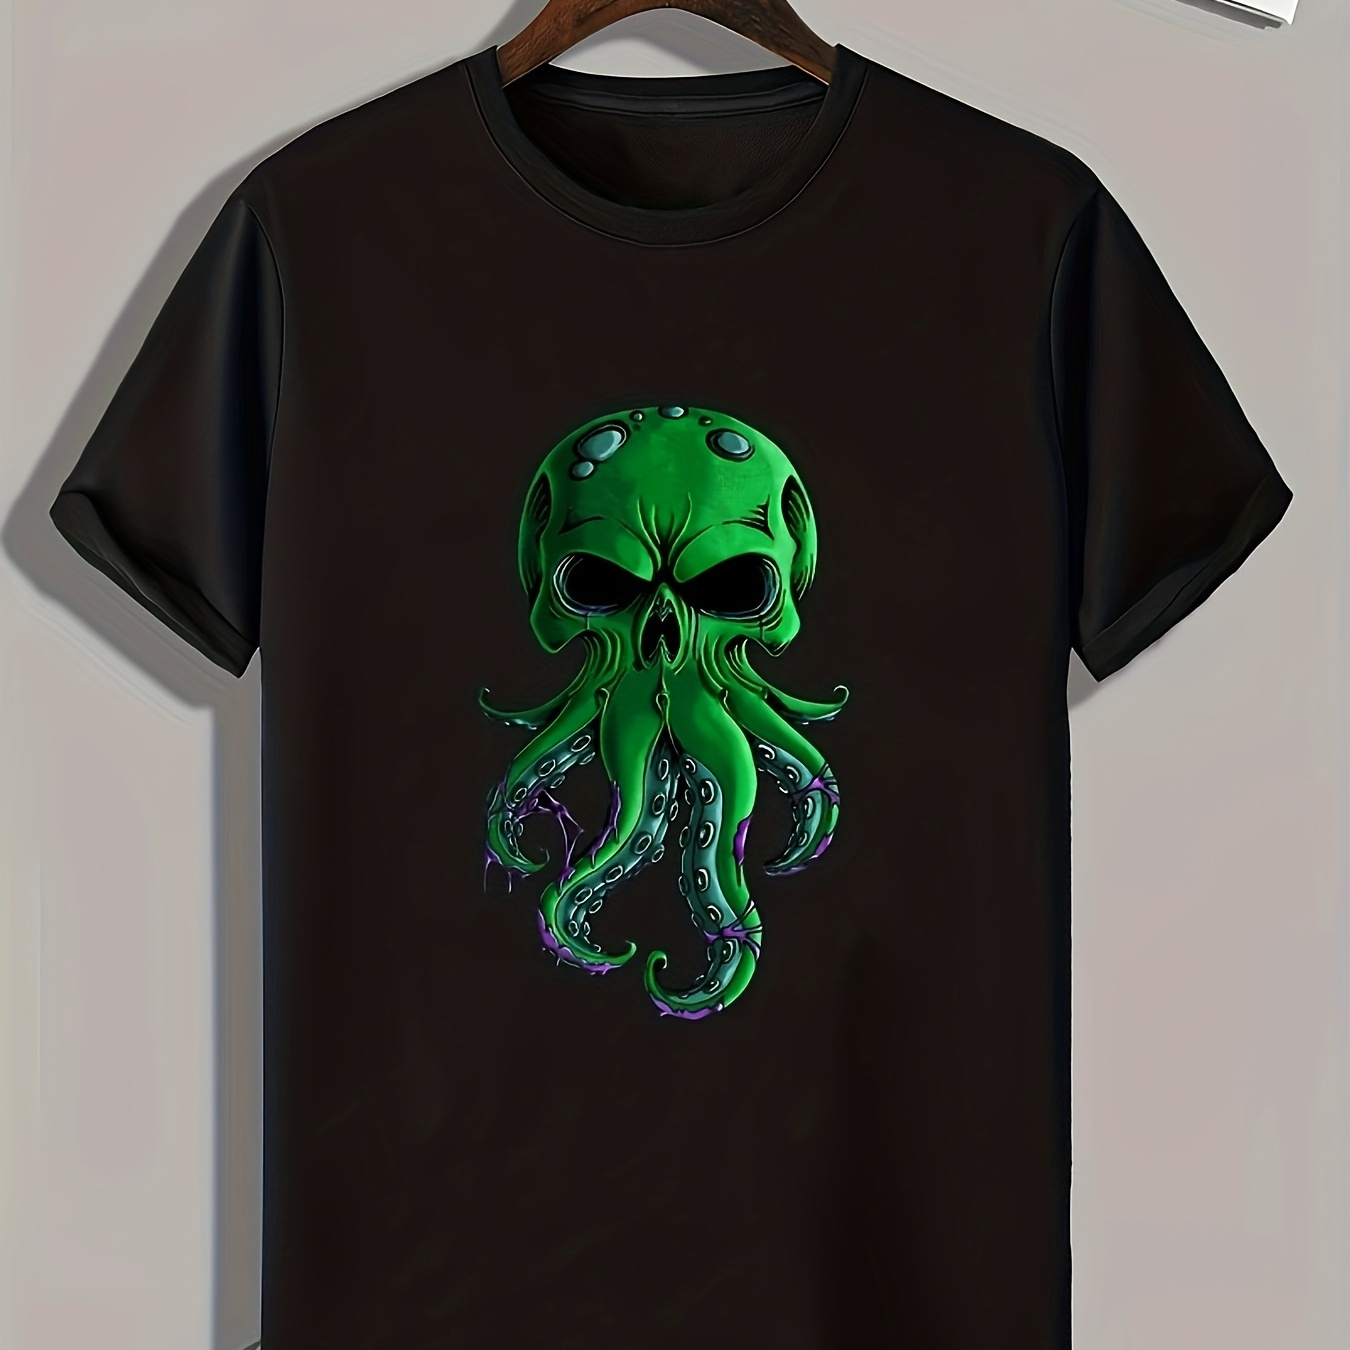 

Monster Print, Men's Graphic T-shirt, Casual Comfy Tees For Summer, Mens Clothing